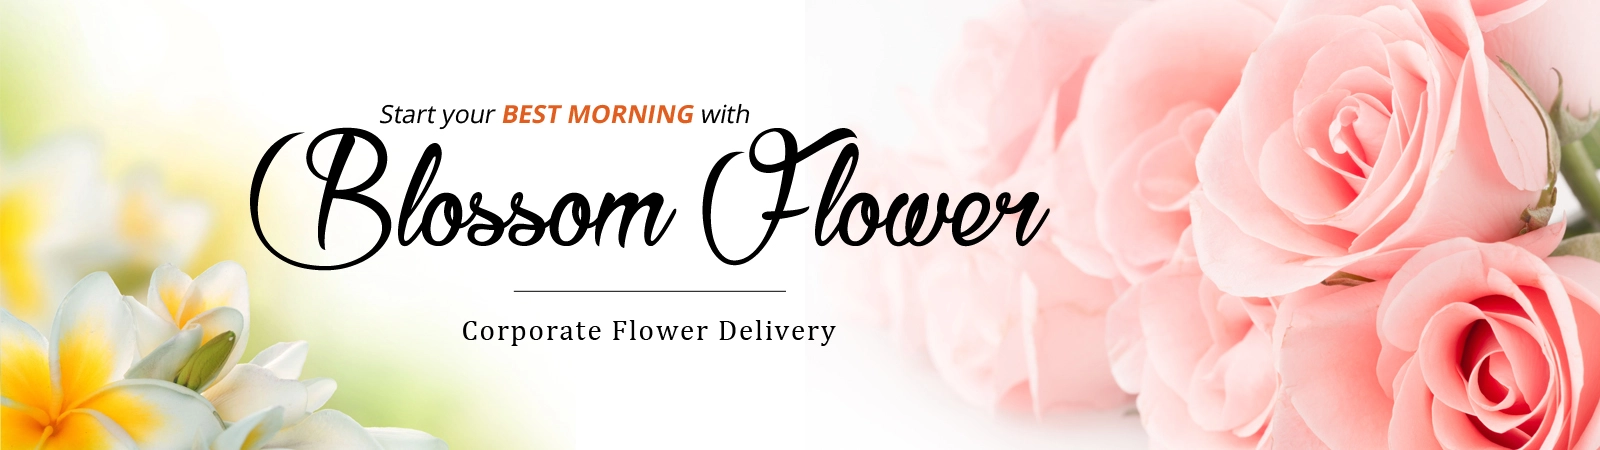 Corporate Flower Bouquet Delivery in India